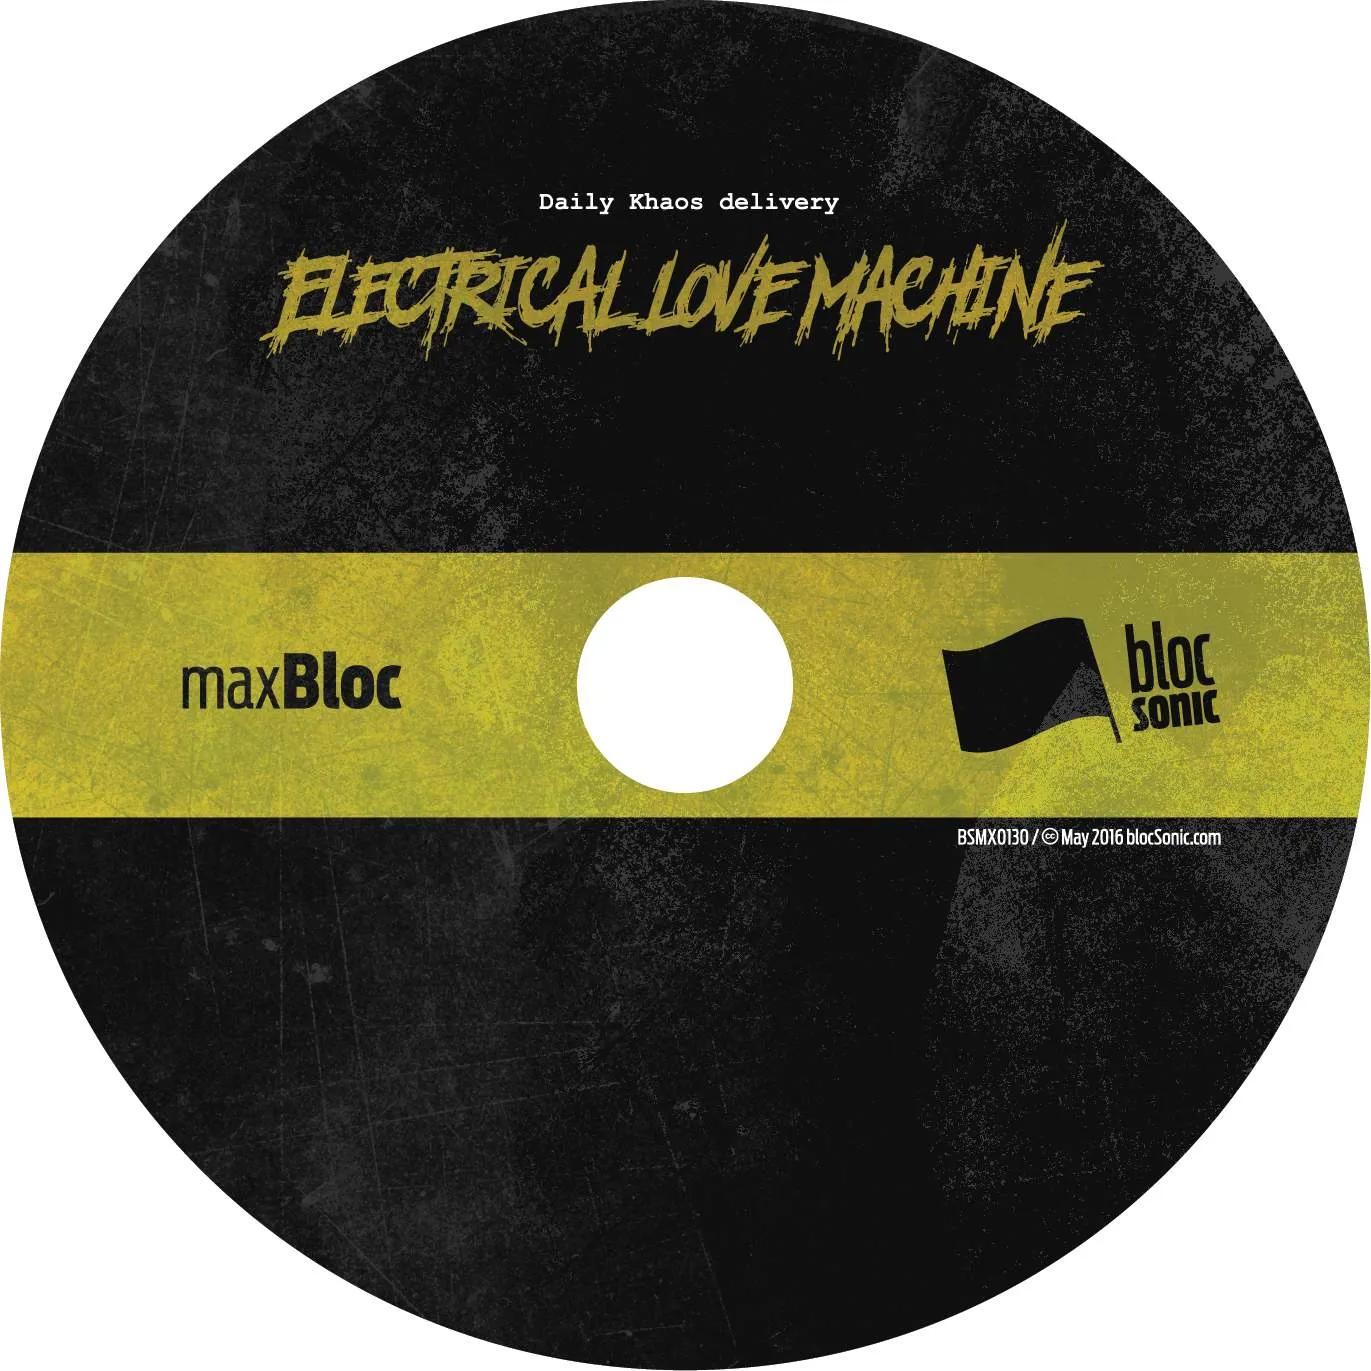 Album disc for “Electrical Love Machine” by Daily Khaos delivery